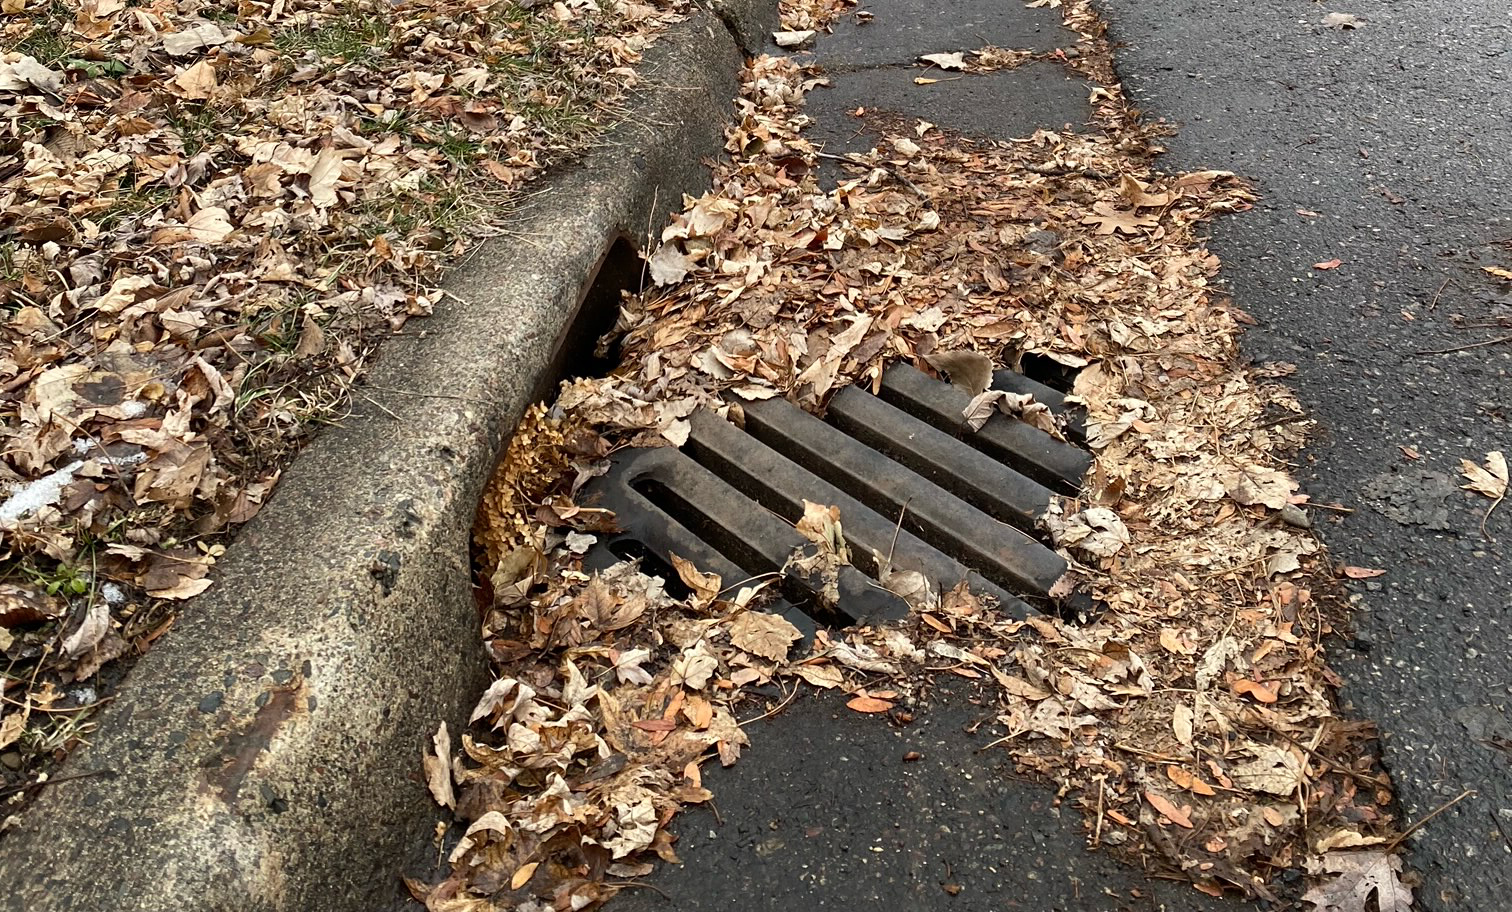 Fallen brown leaves gathered around a storm drain 